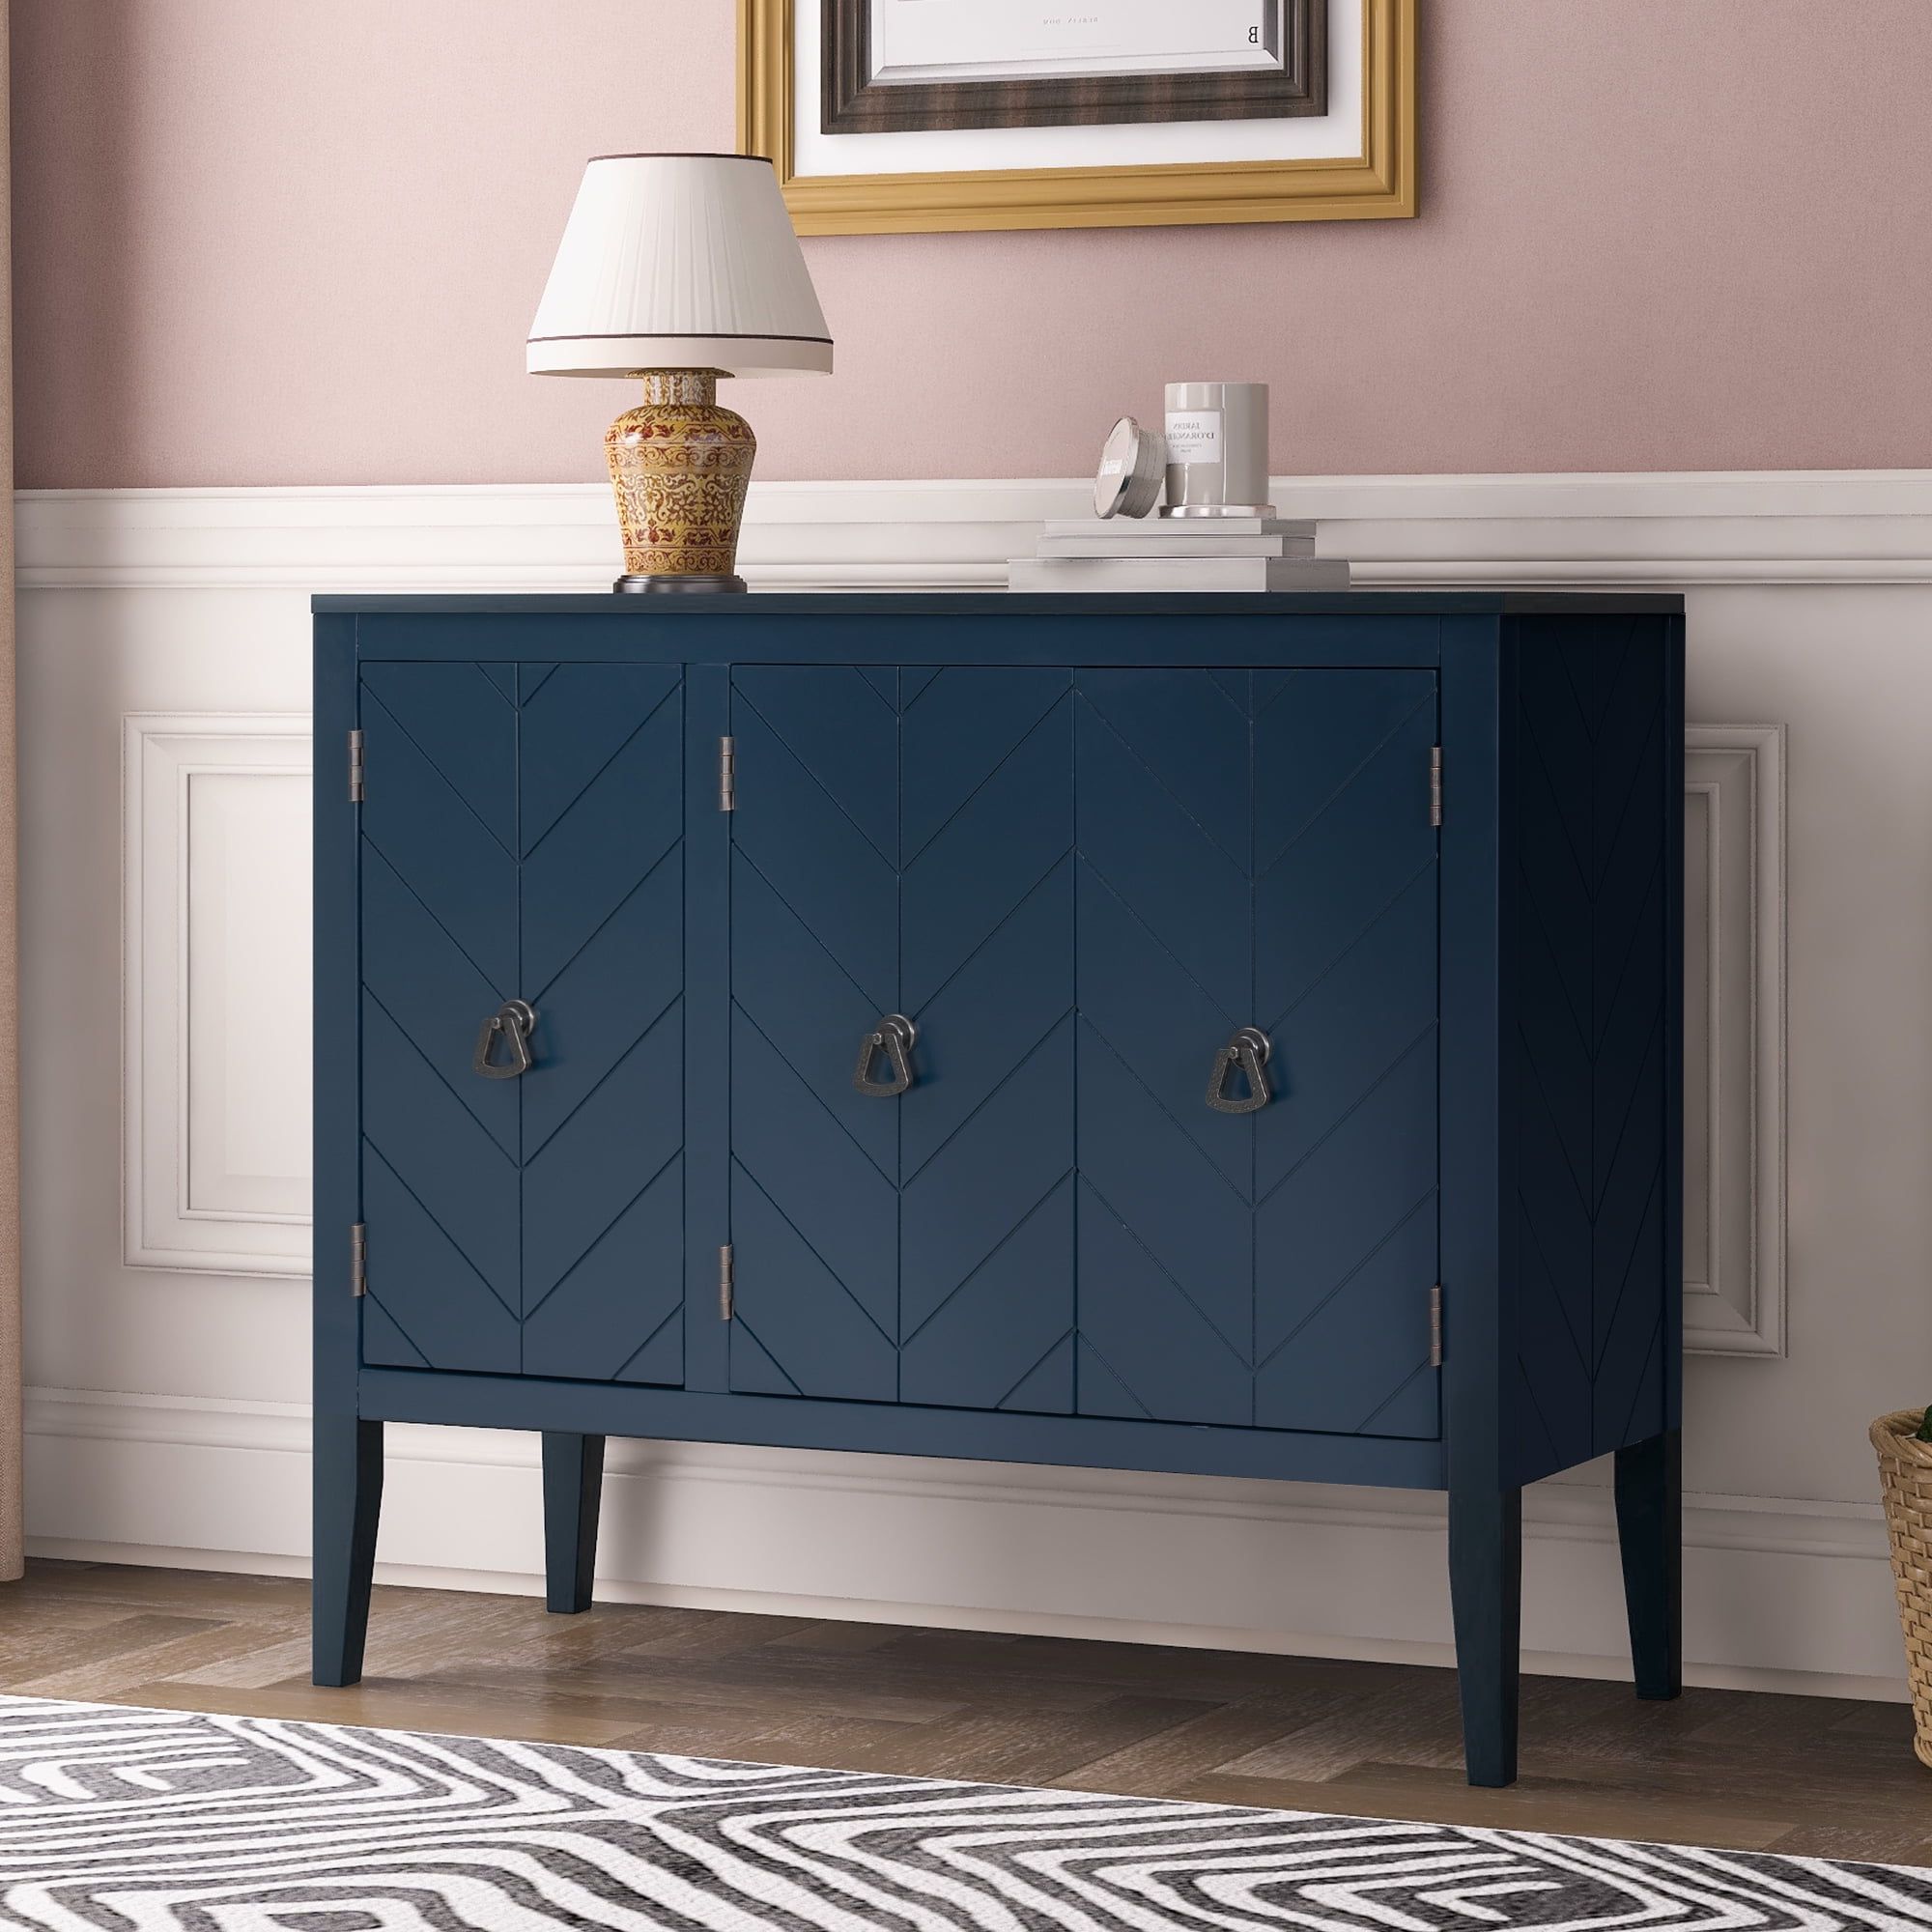 Sideboard Buffet Storage Cabinet, Solid Wood Accent Cabinets With 3 Doors  And Adjustable Shelf, Rustic Blue Console Tables For Entryway Hallway,  Dining Room, Living Room, Study, Ja3980 – Walmart Pertaining To 3 Door Accent Cabinet Sideboards (Gallery 1 of 20)